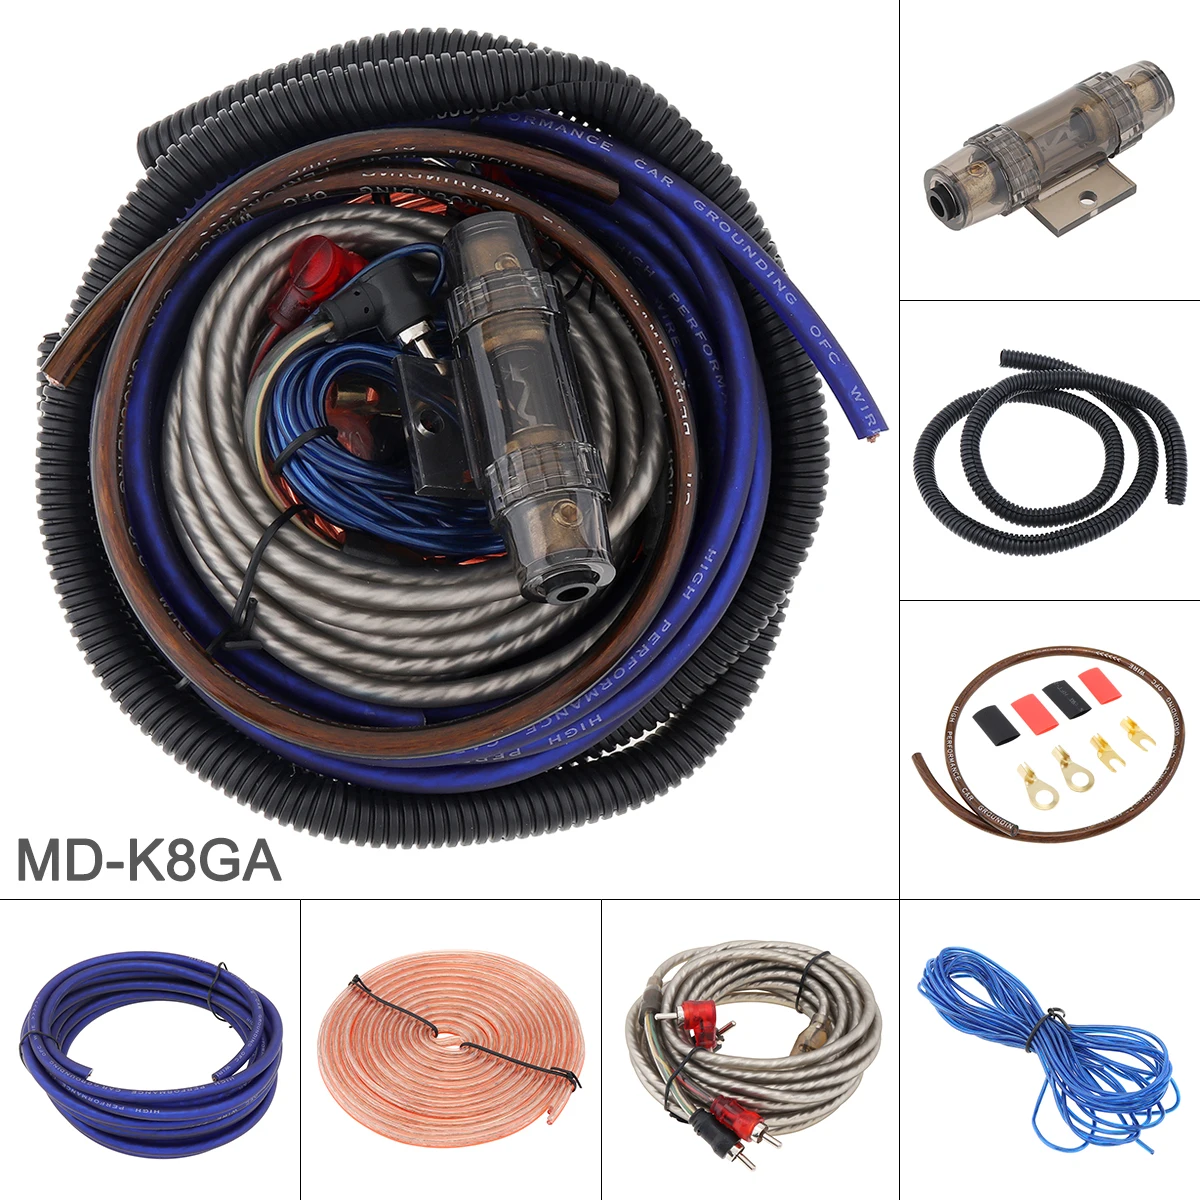 8 Gauge Amplifier Installation Wiring Kit  Car Speaker Woofer Cables Power Amplifier Audio Line Power Line with Fuse Suit